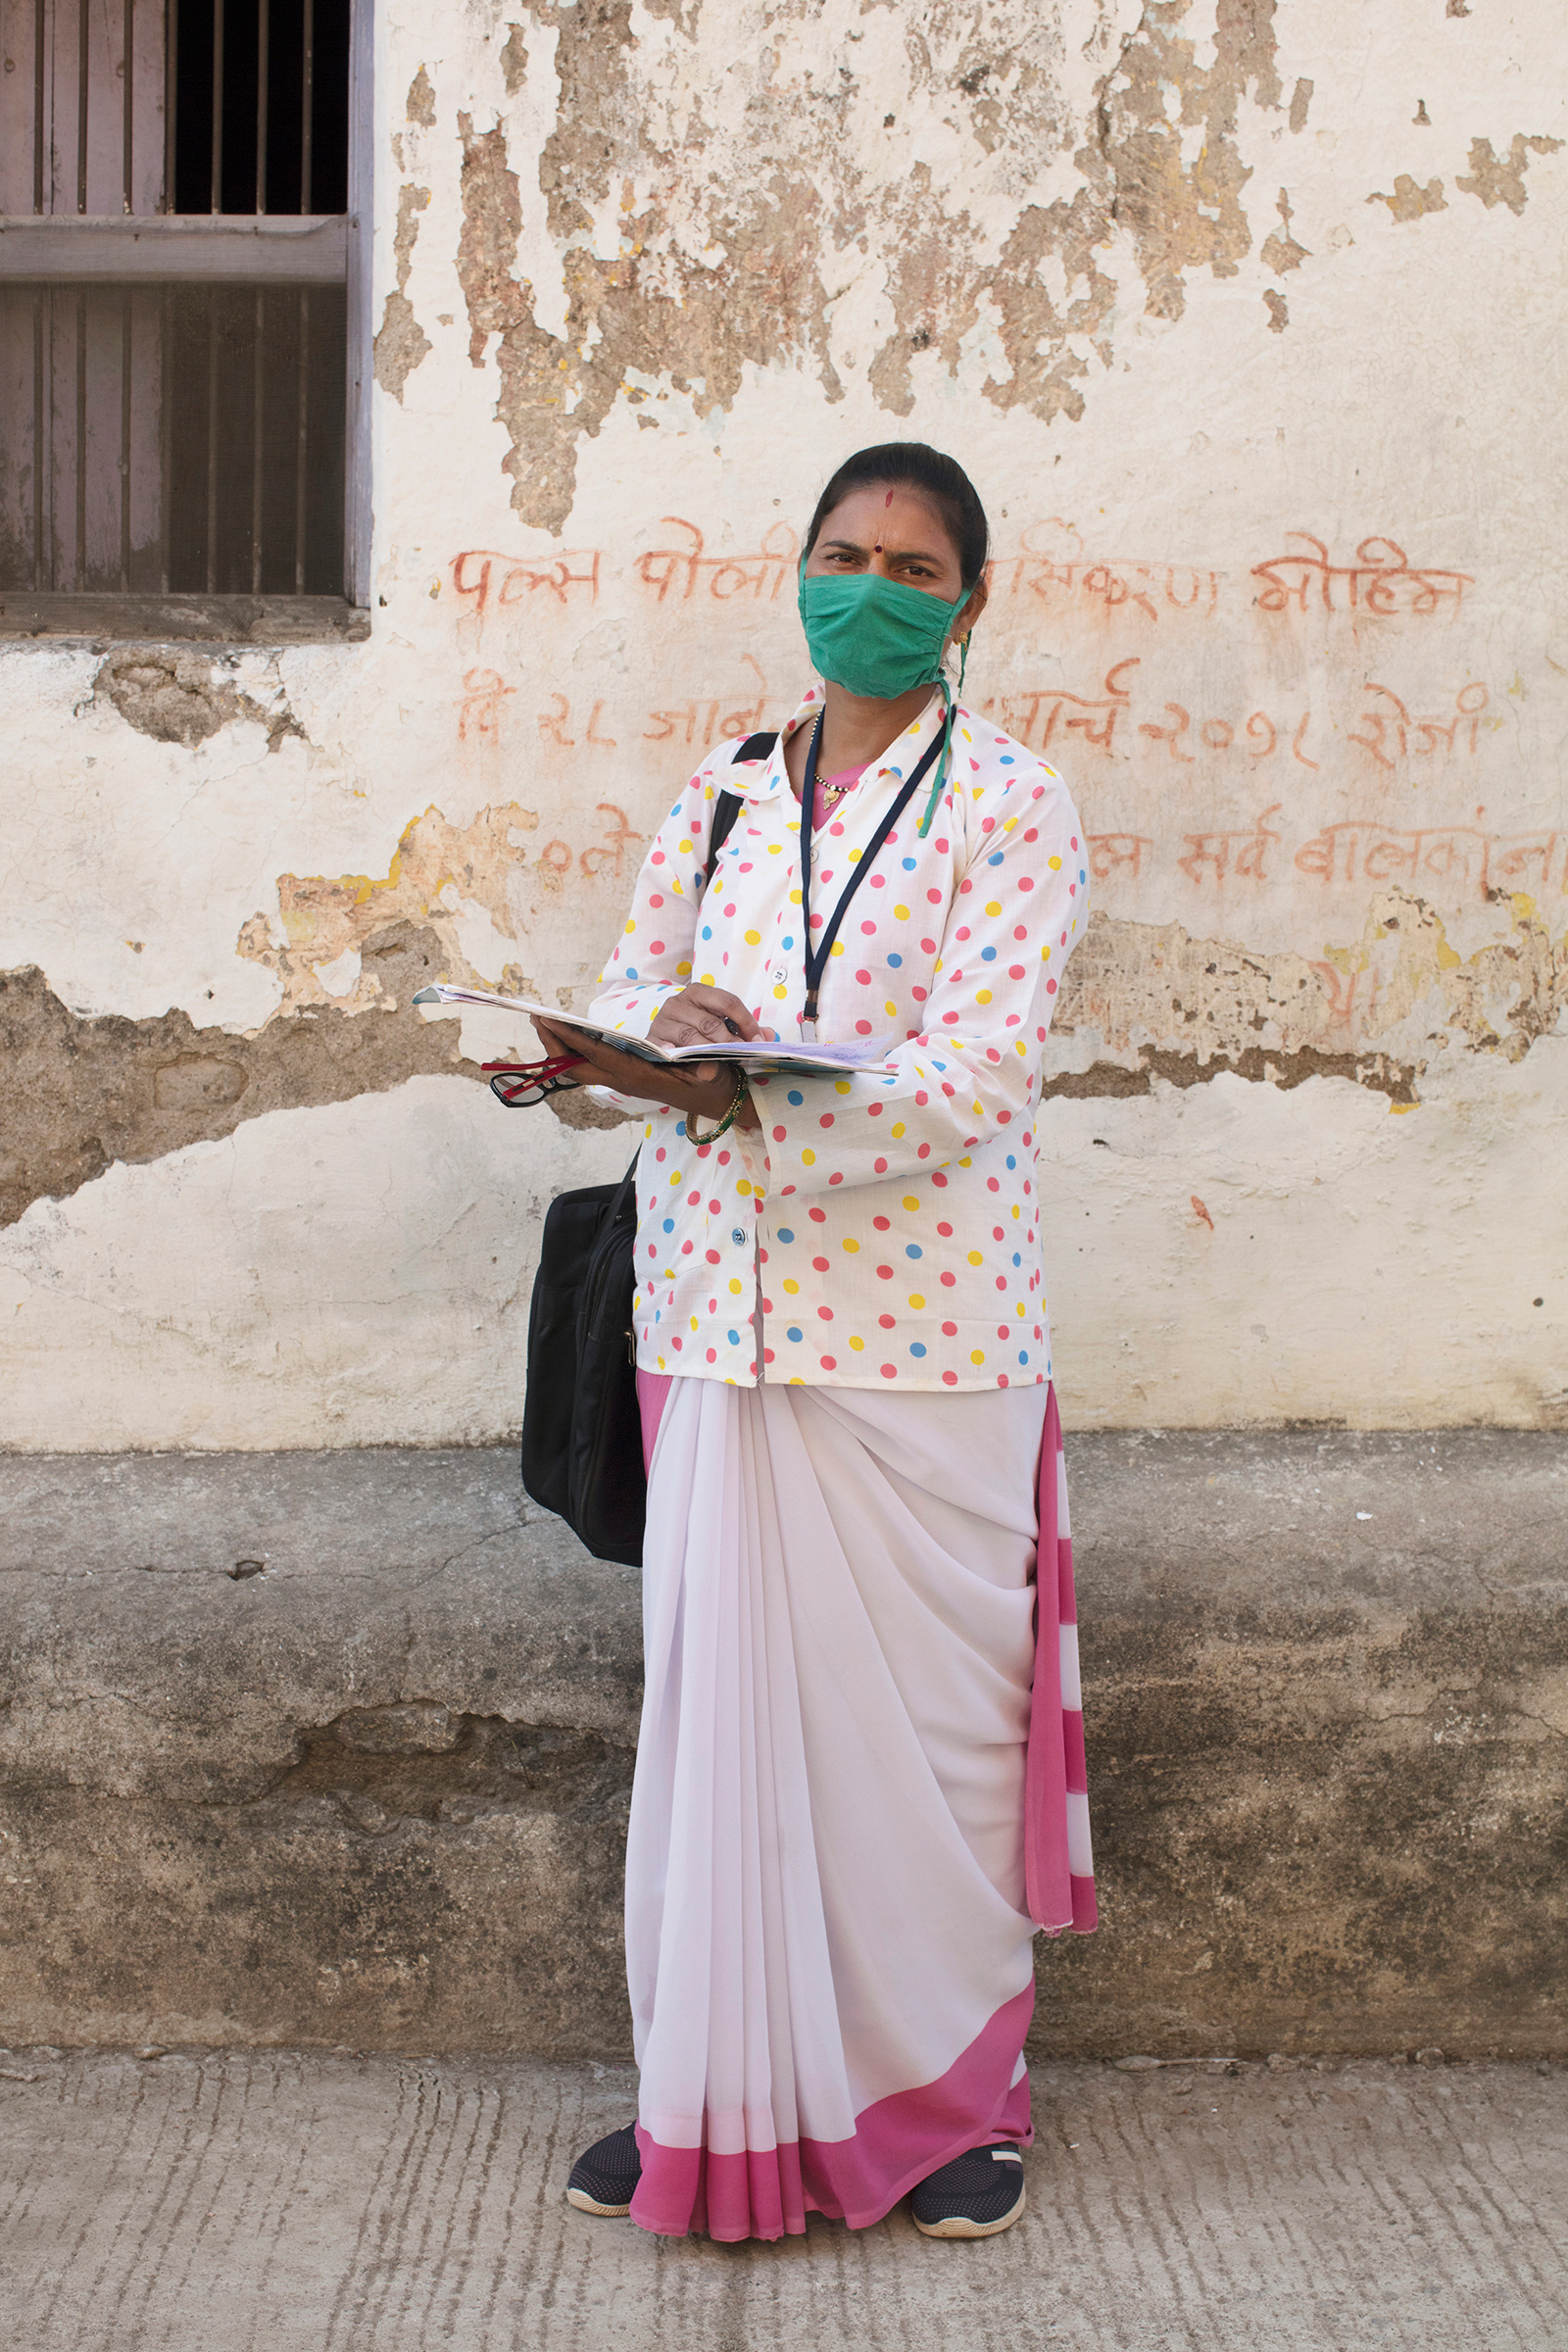 Portrait of Archana Ghugare, a community health worker, in Pavnar, Maharashtra, India, on Dec. 1, 2020. In the background is a message encouraging people to bring their children for the Polio vaccine drive.